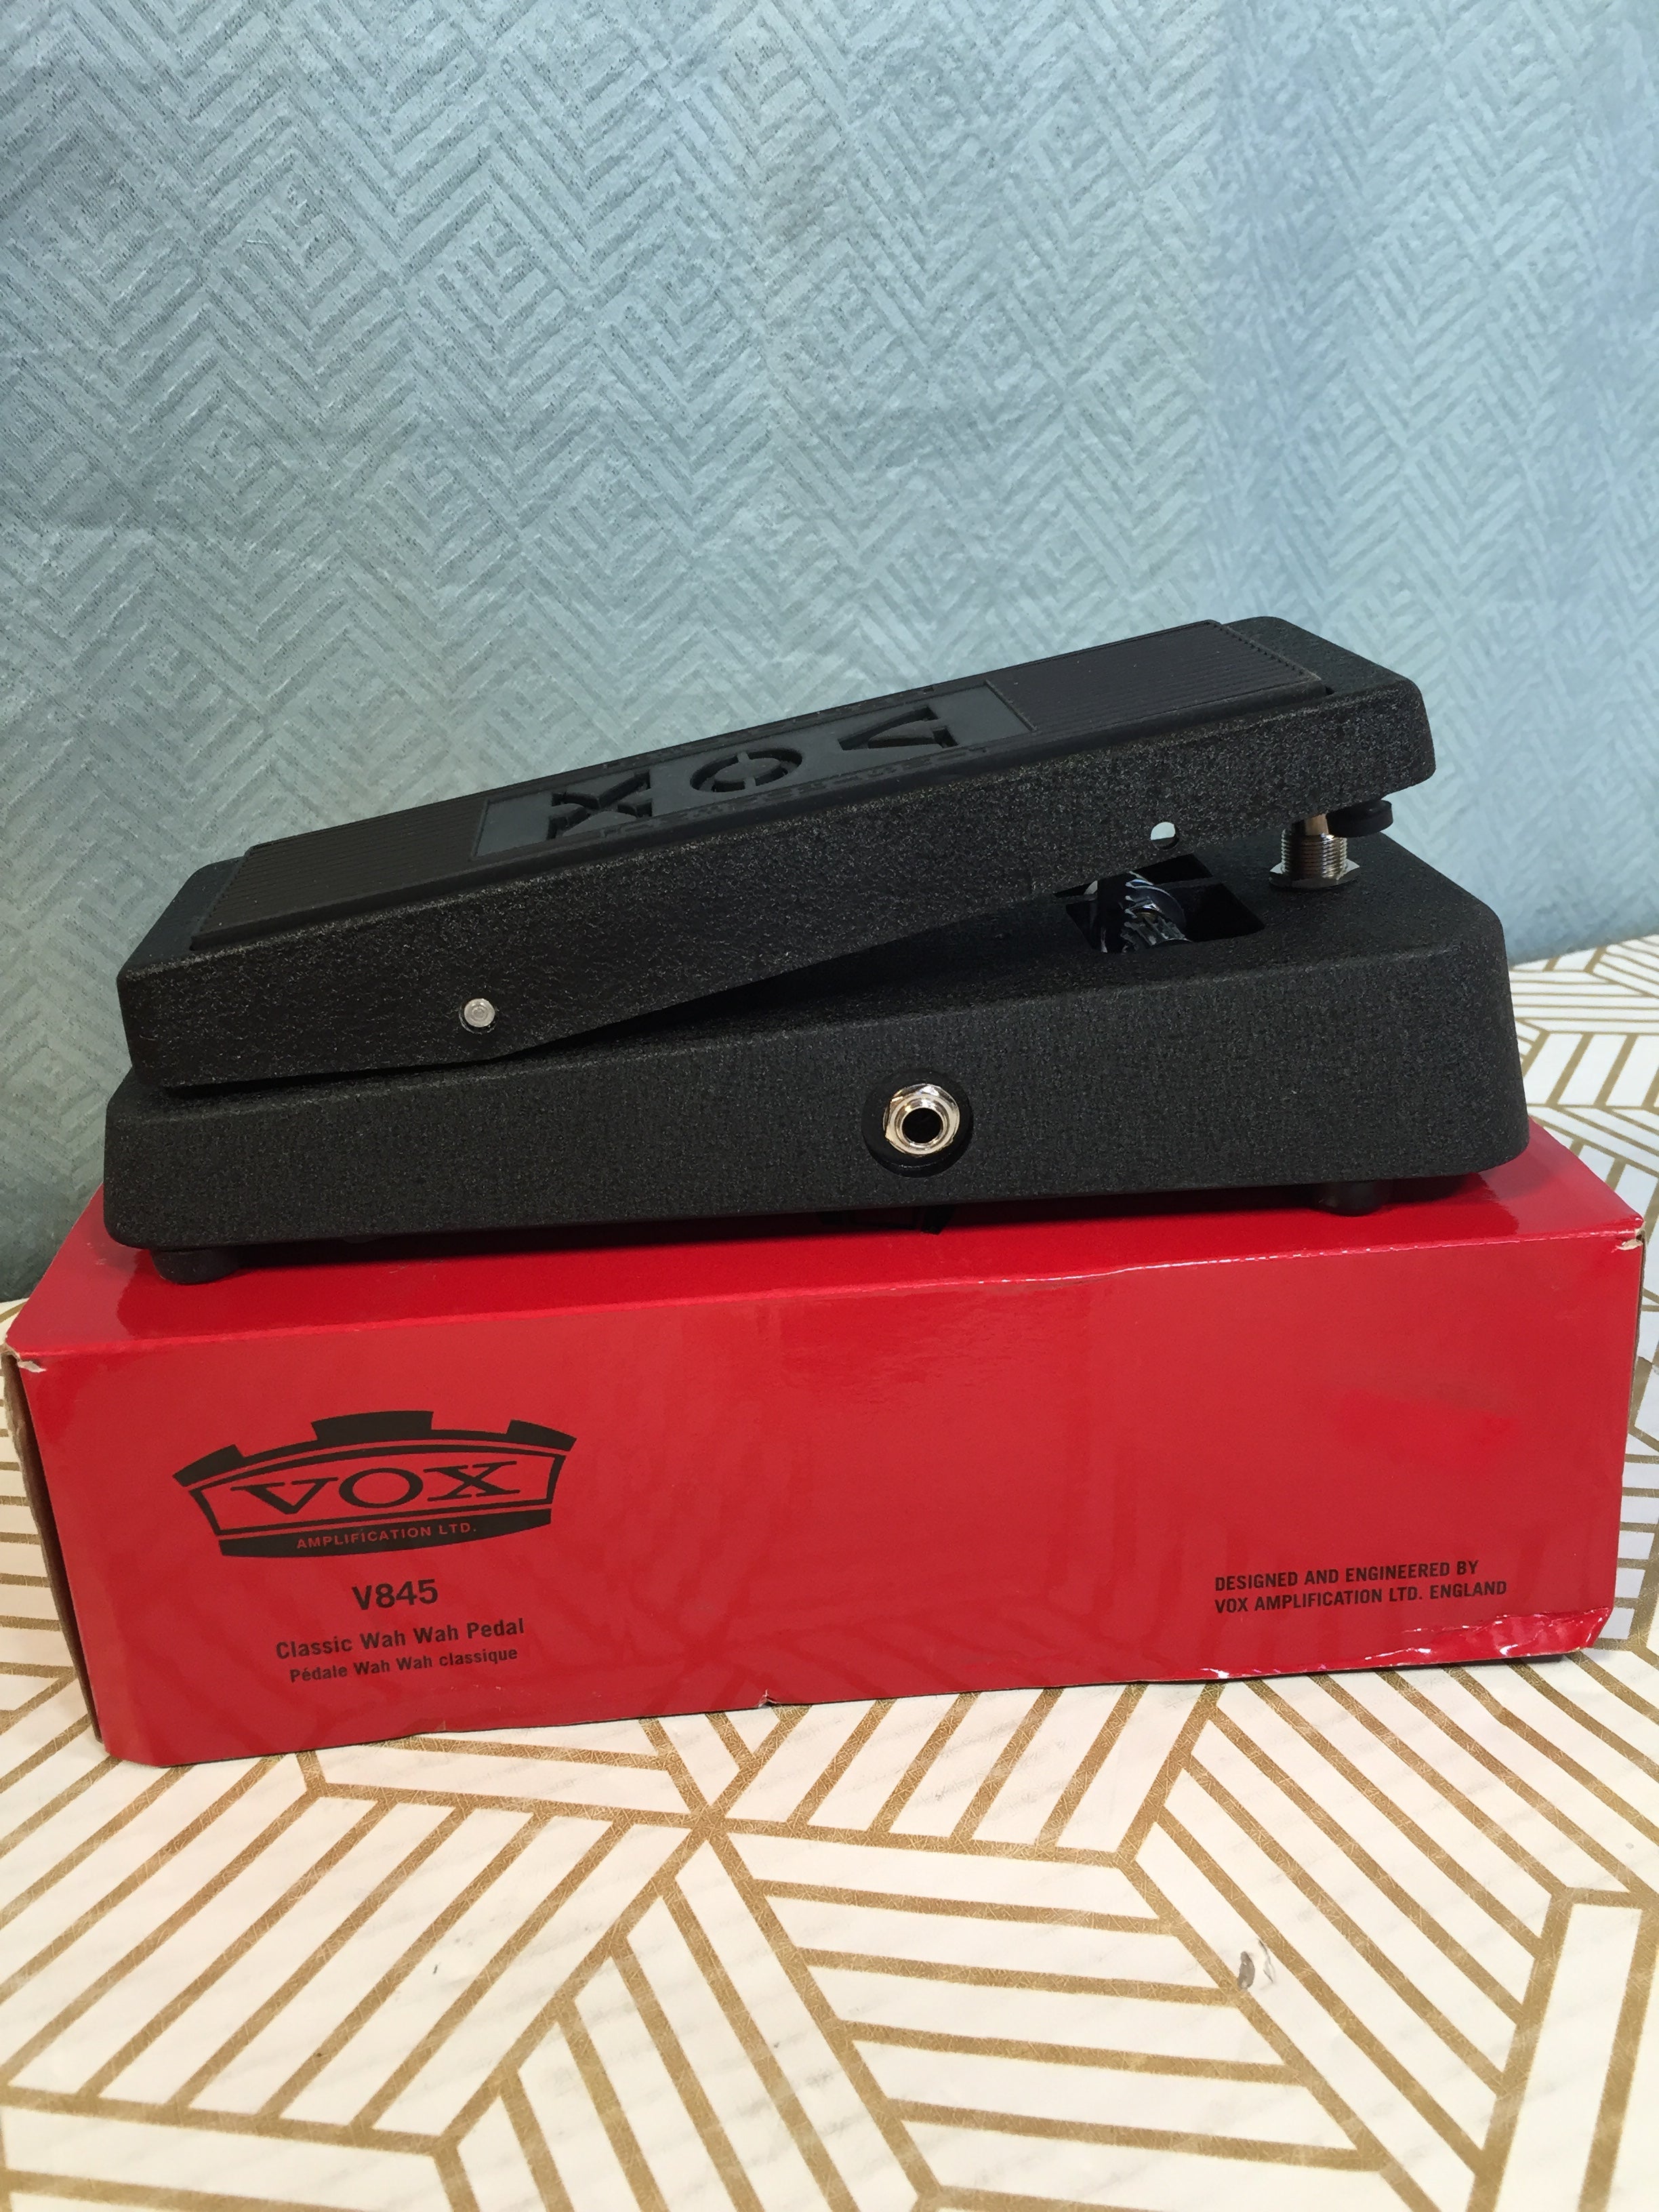 VOX V845 Classic Wah Wah Guitar Effects Pedal (7932563751150)